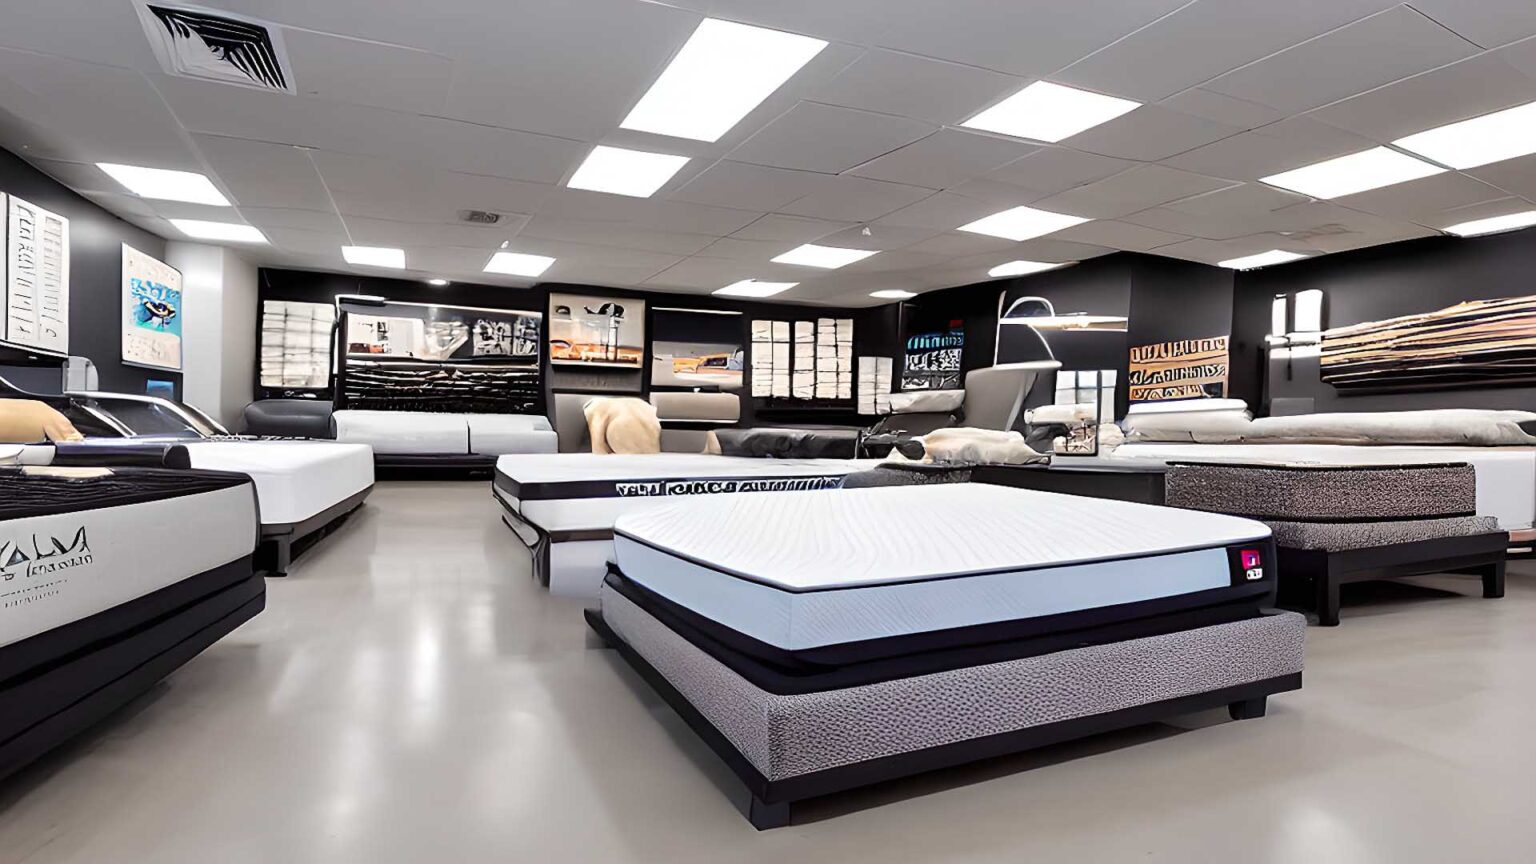 Mattress Stores, mattress dealers, and mattress retailers near me in Sioux City, IA